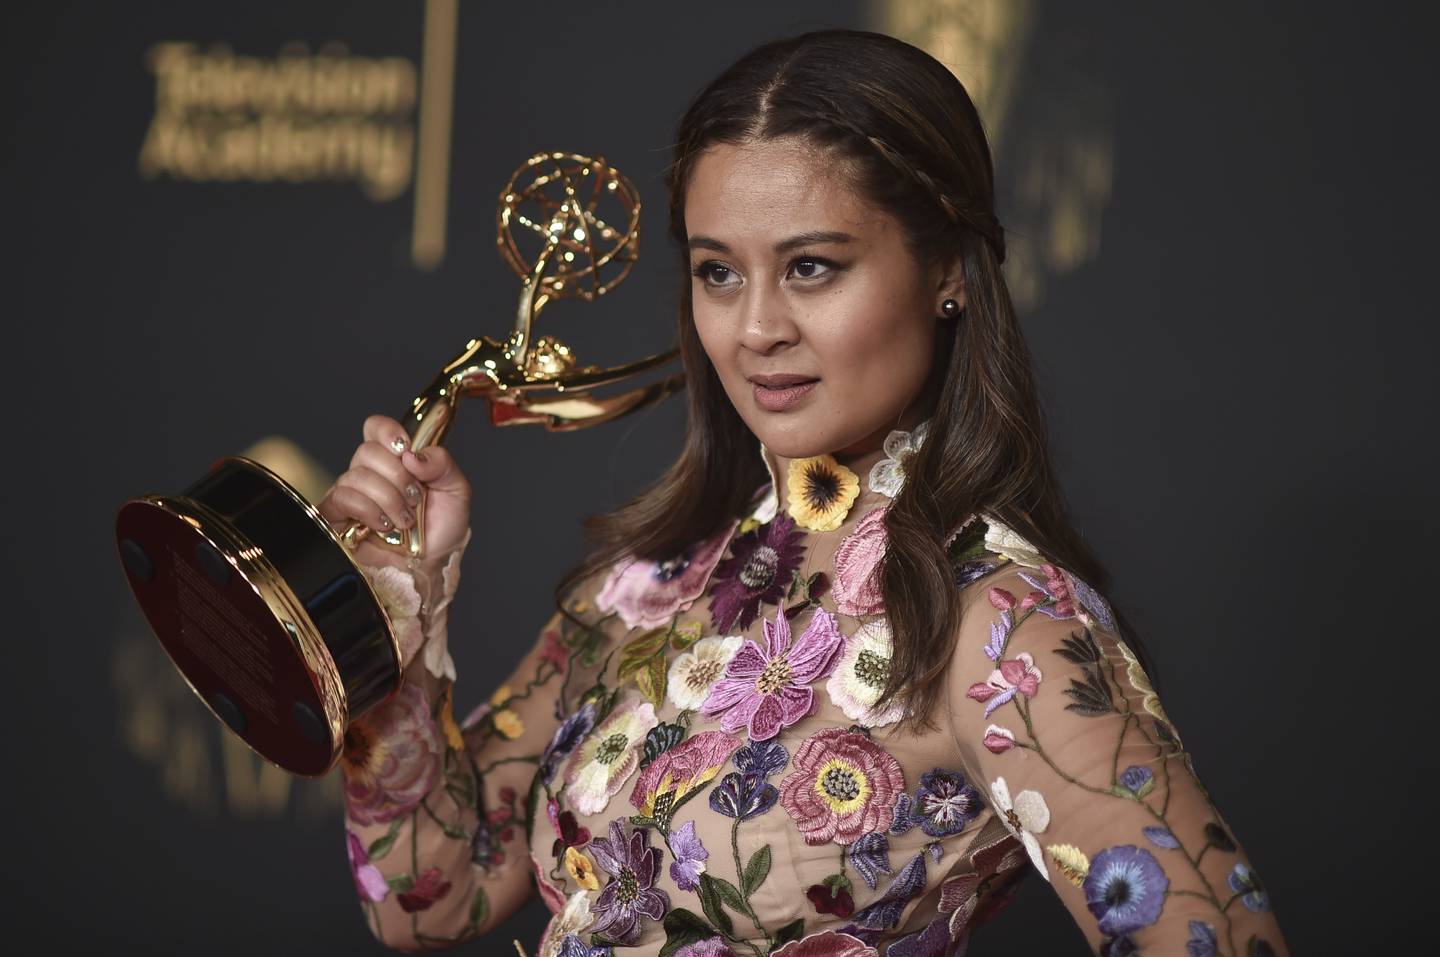 Michelle Tesoro poses with the award for Outstanding Single-Camera Picture Editing for a Limited or Anthology Series or Movie, for 'The Queen's Gambit' at the Creative Arts Emmy Awards. AP